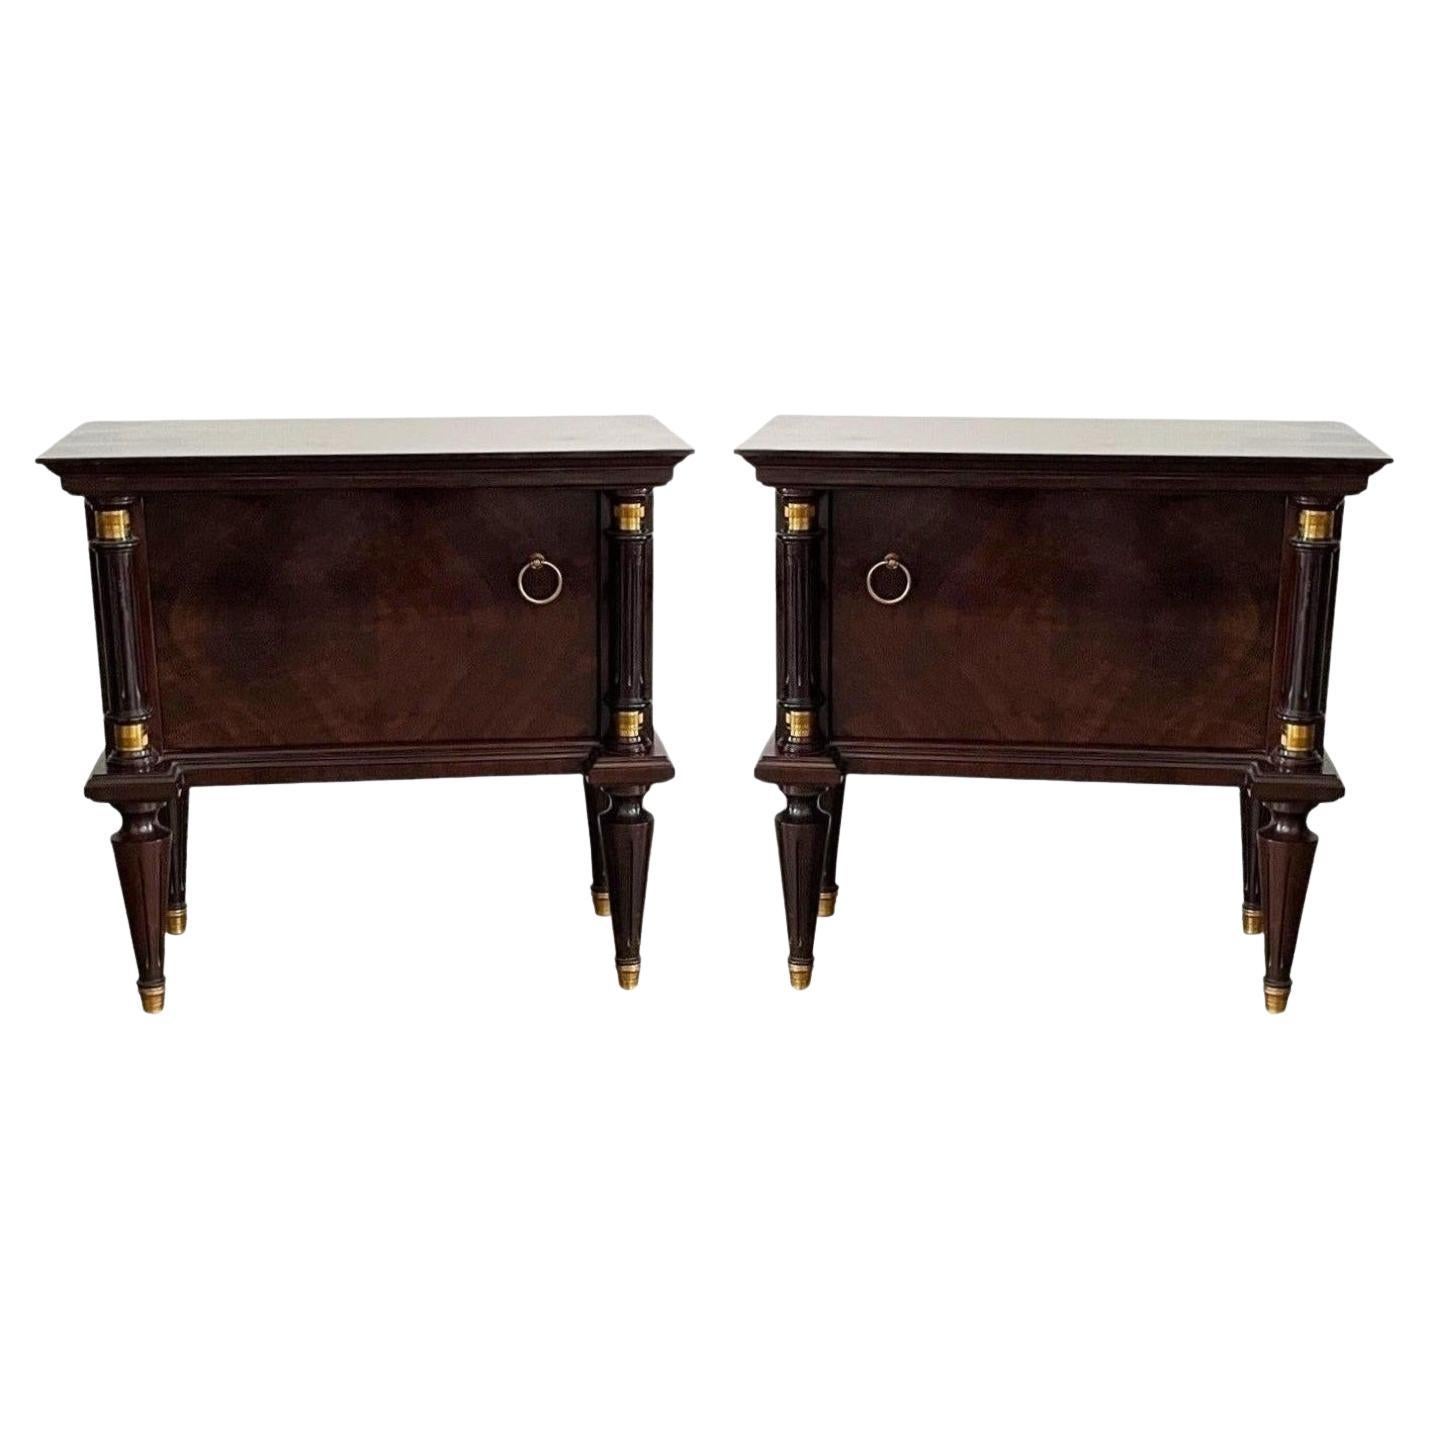 Early 20th Century Italian Neoclassical Pair of Bedside Tables in Mahogany